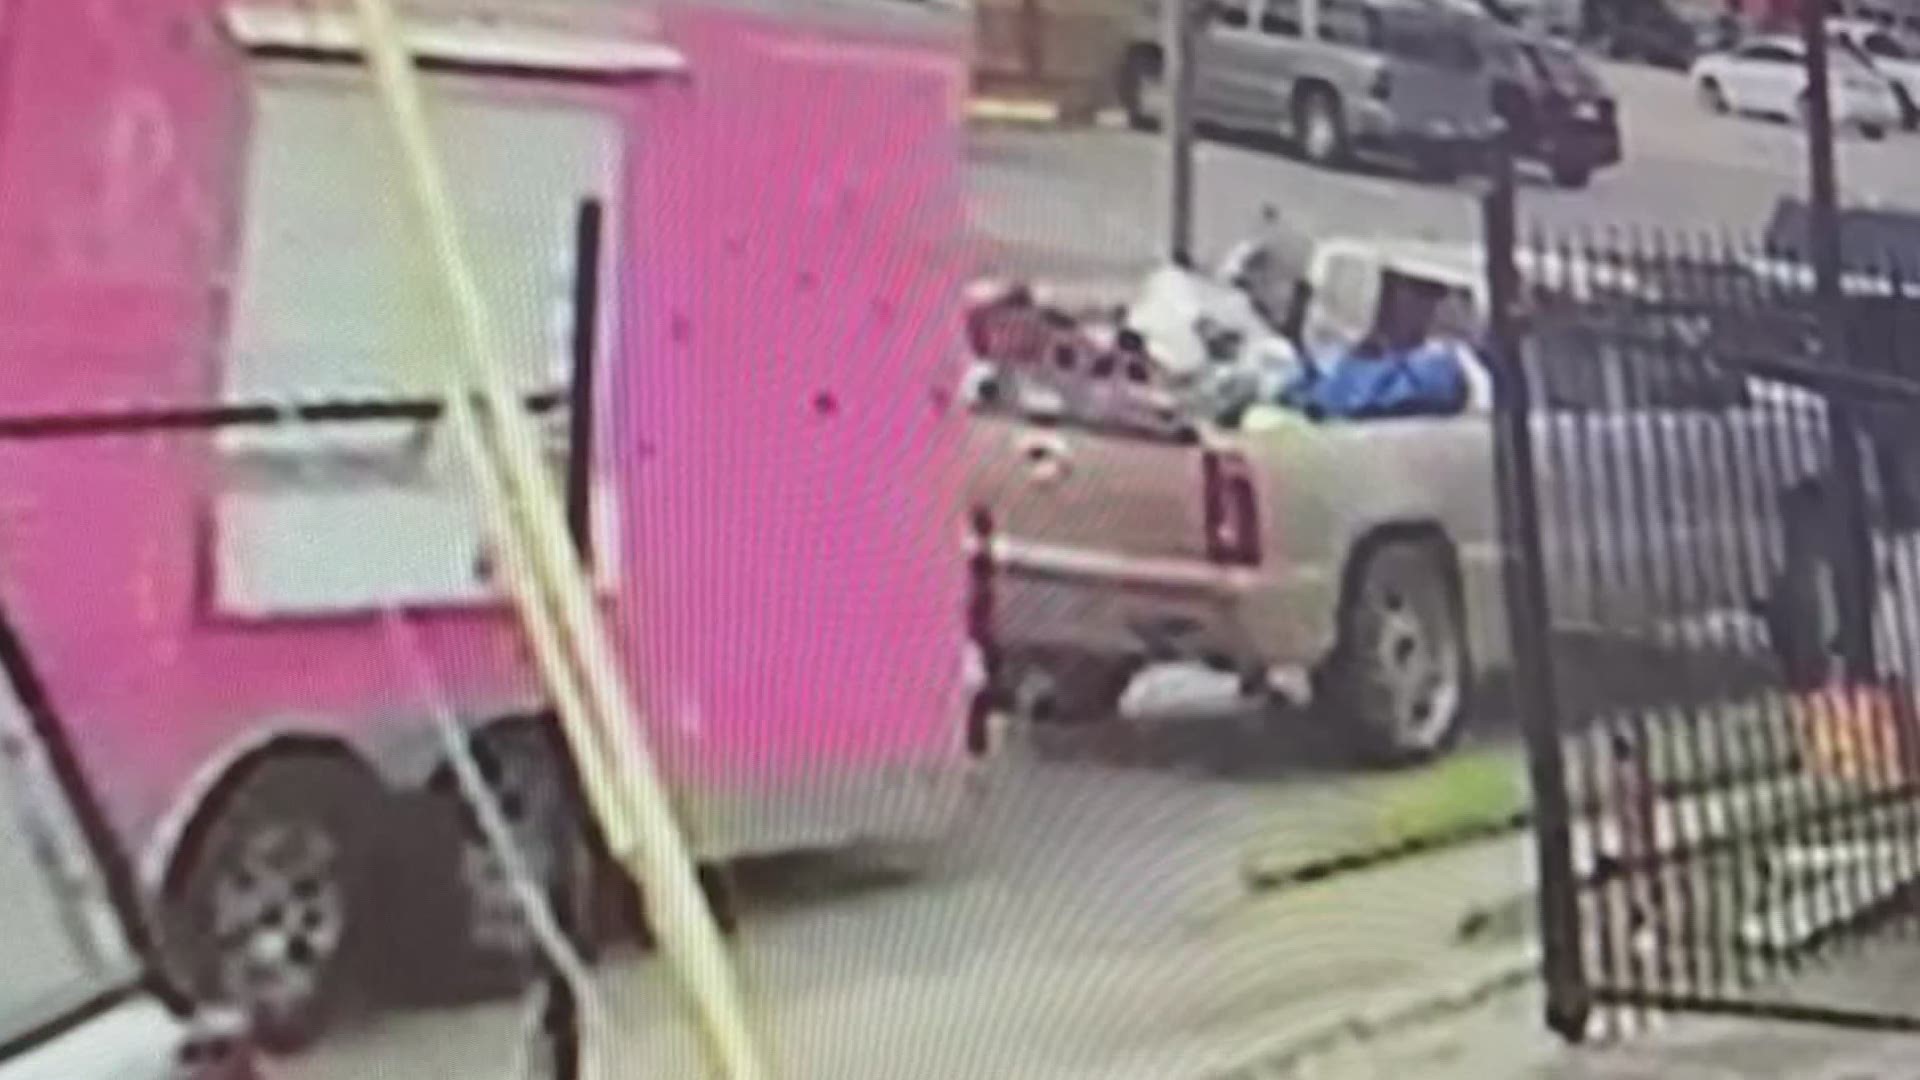 A stolen food truck was caught on camera, but thanks to the help from social media, the owners got it back!